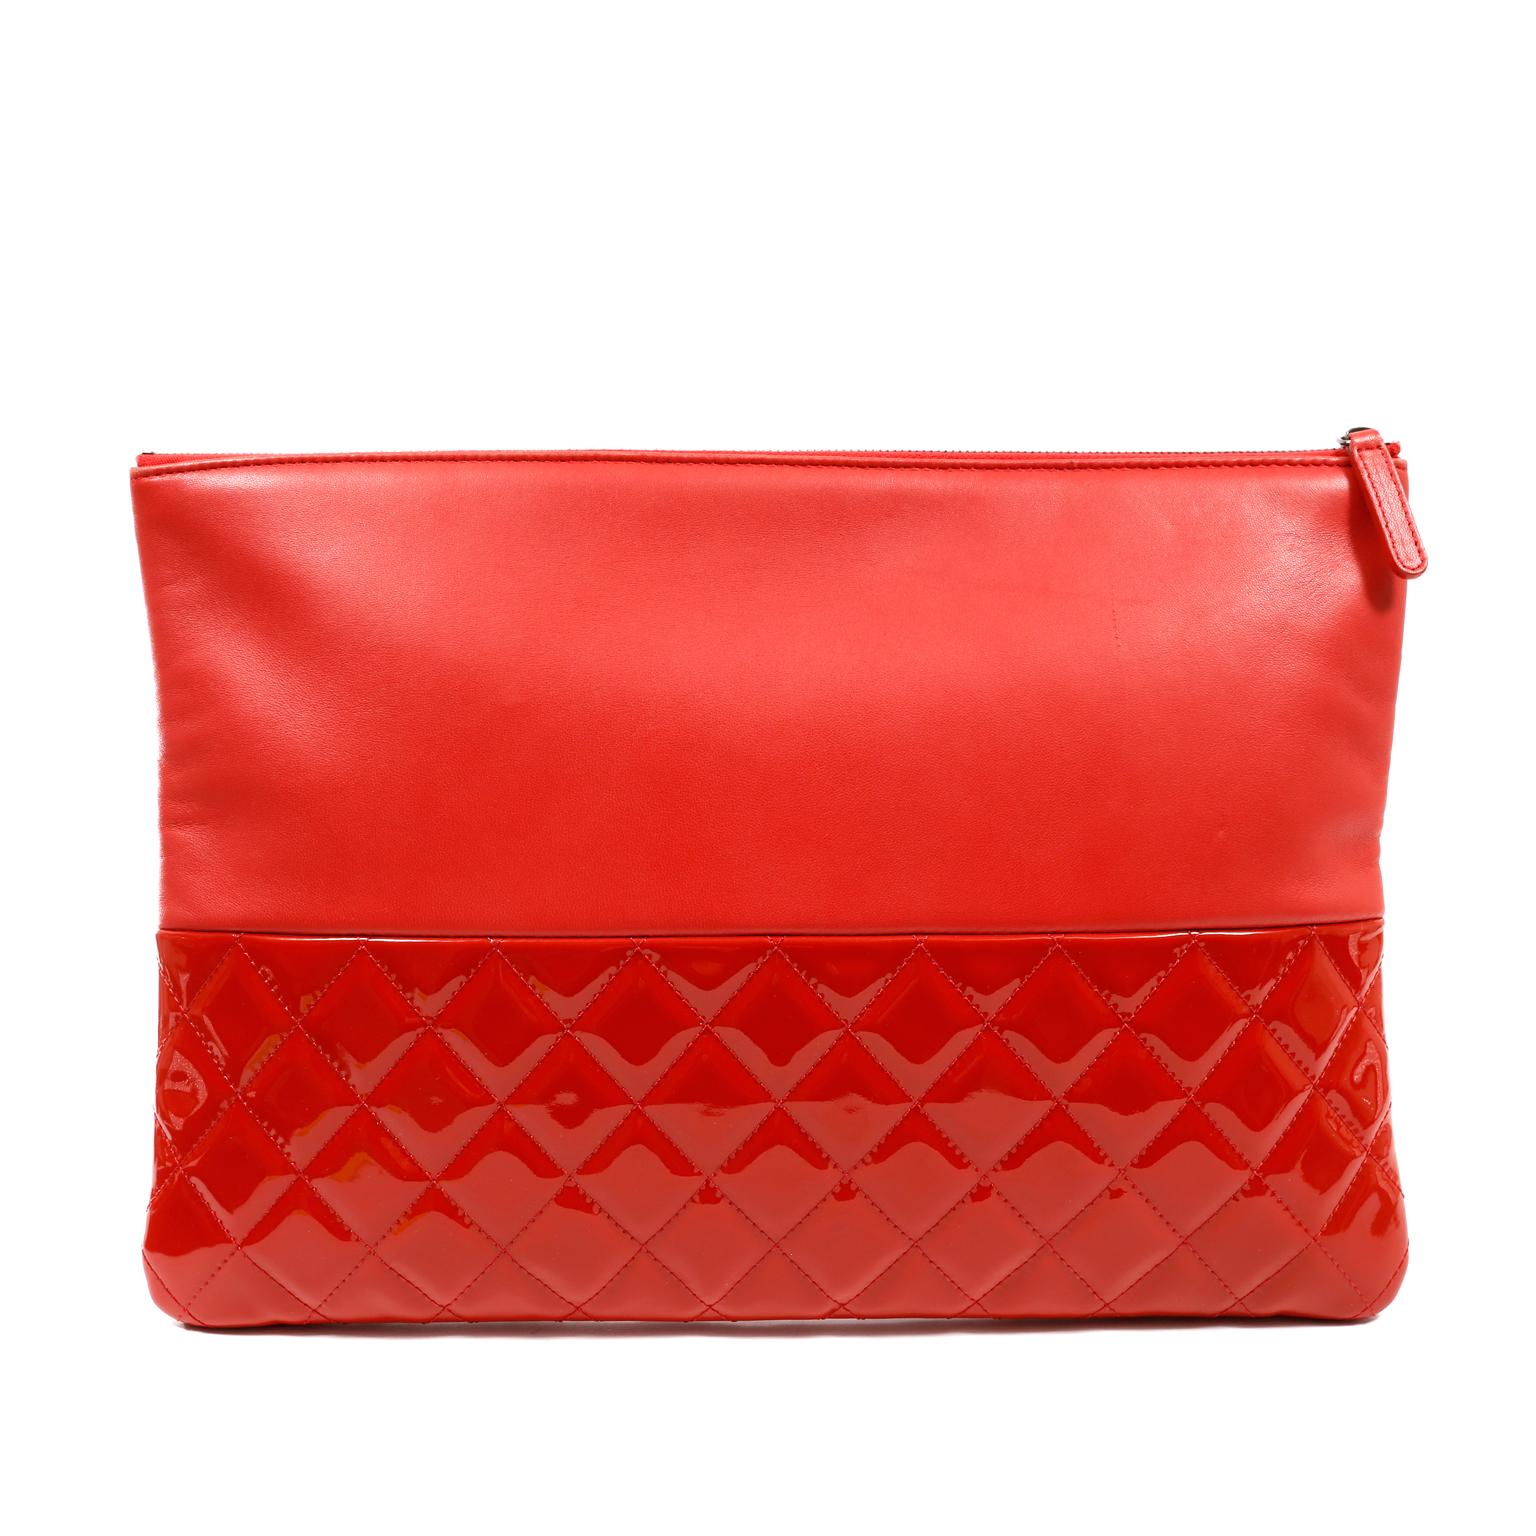 This authentic Chanel Red Lambskin and Patent Leather Clutch is in excellent condition.  The simple silhouette gets a boost with a mixed texture and fiery red color.  
Lipstick red smooth lambskin sits atop a quilted patent leather bottom.  Zippered